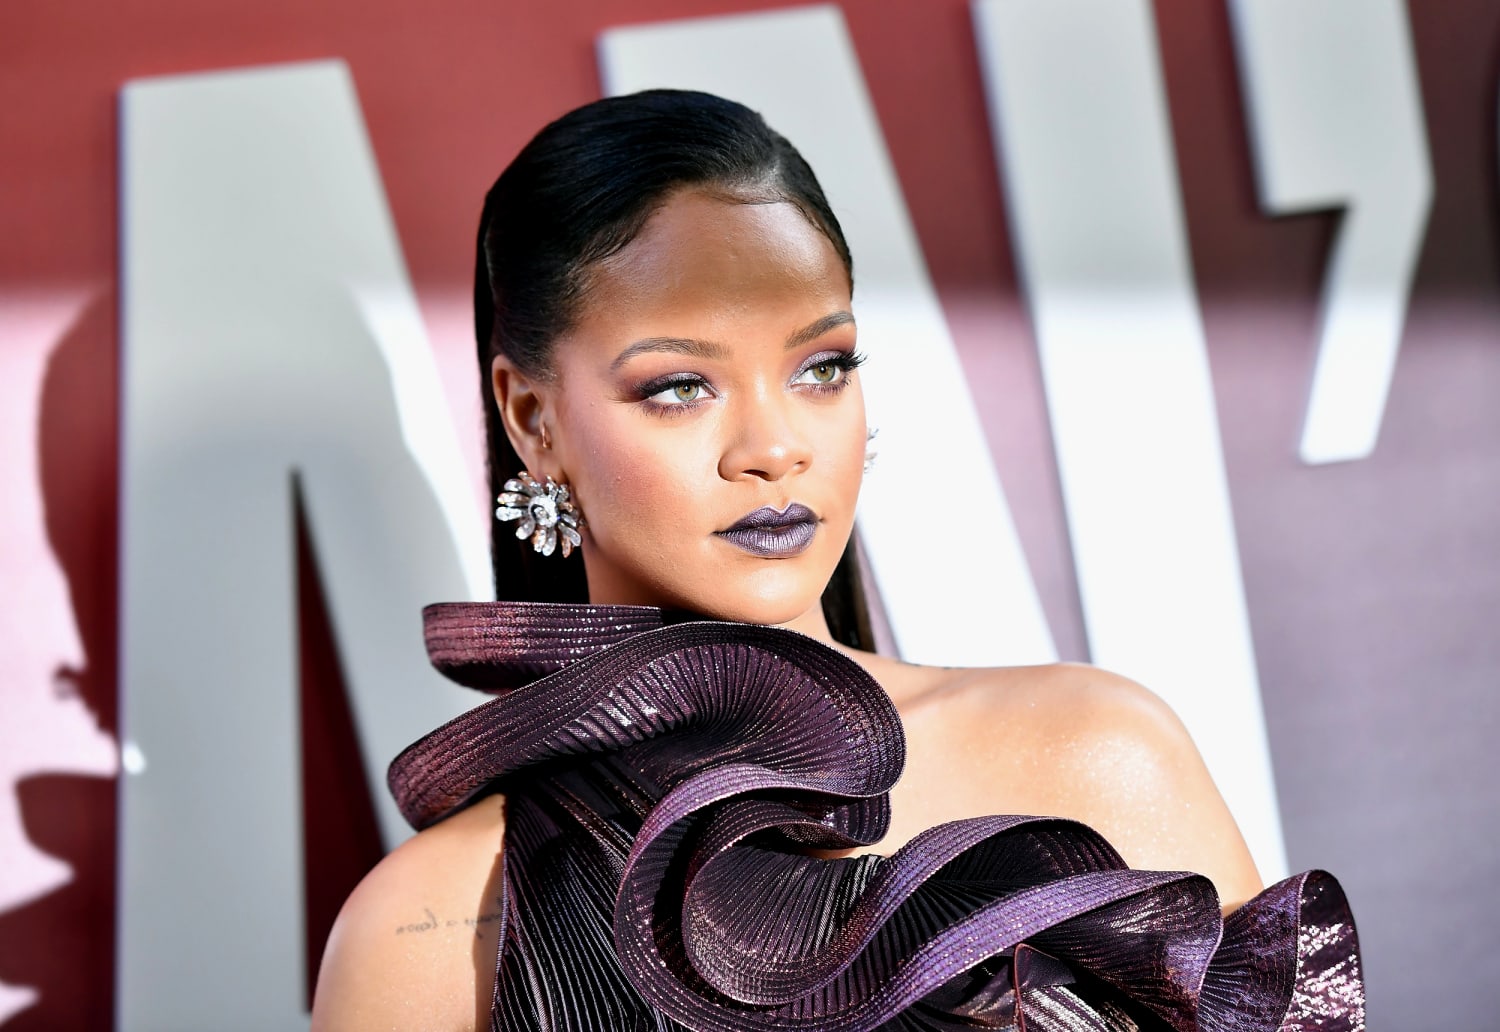 The legacy of Fenty as Rihanna puts her luxury fashion brand on pause